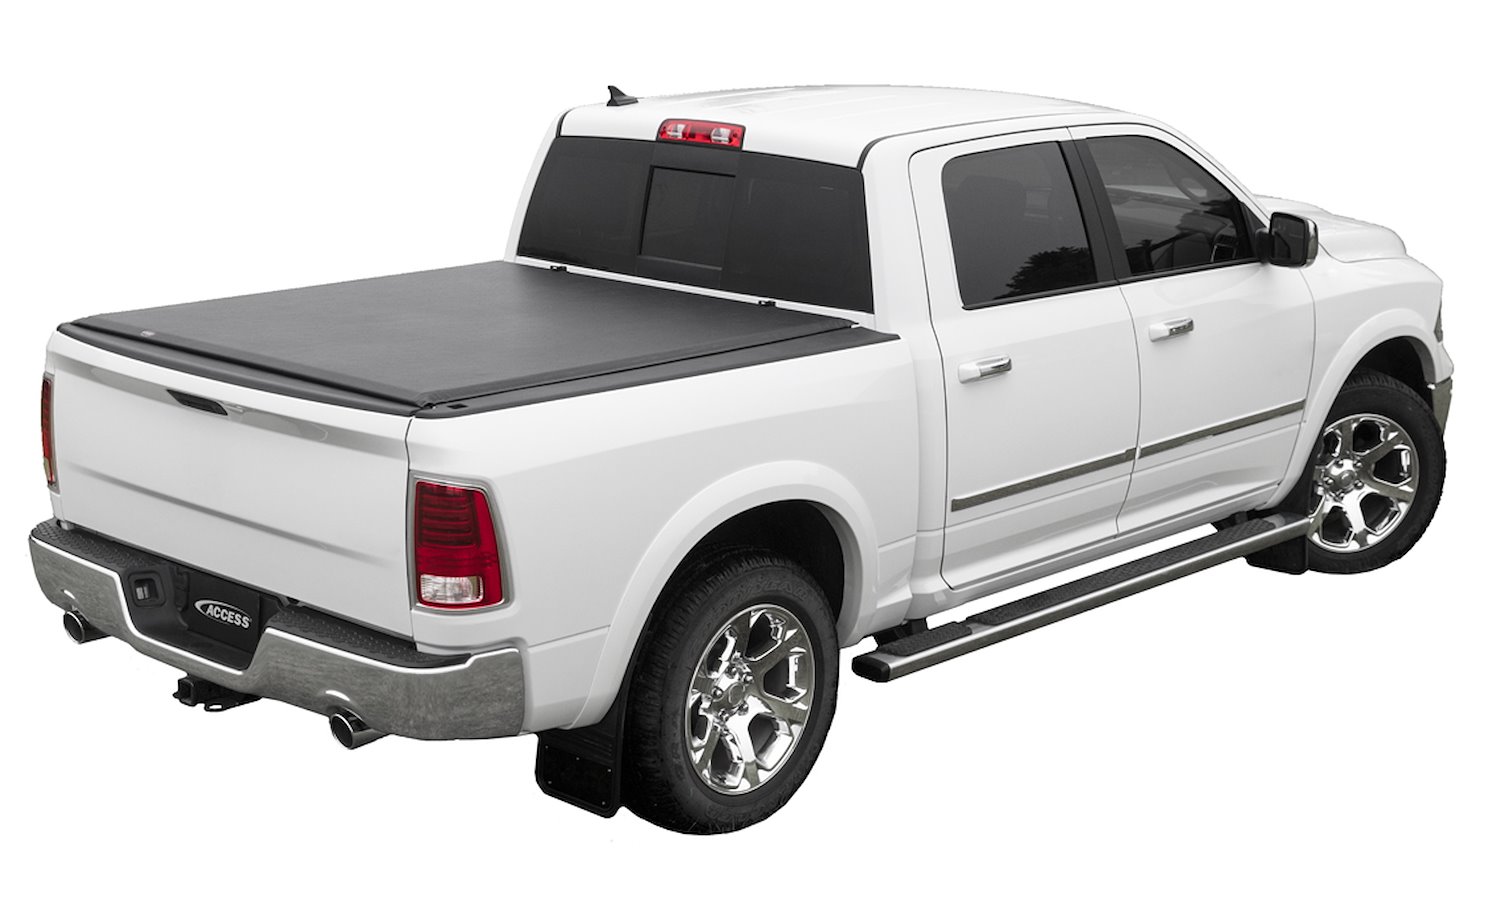 LORADO Roll-Up Tonneau Cover, 2002-2008 Dodge Ram 1500, 2003-2009 Dodge Ram 2500/3500, with 6 ft. 4 in. Bed